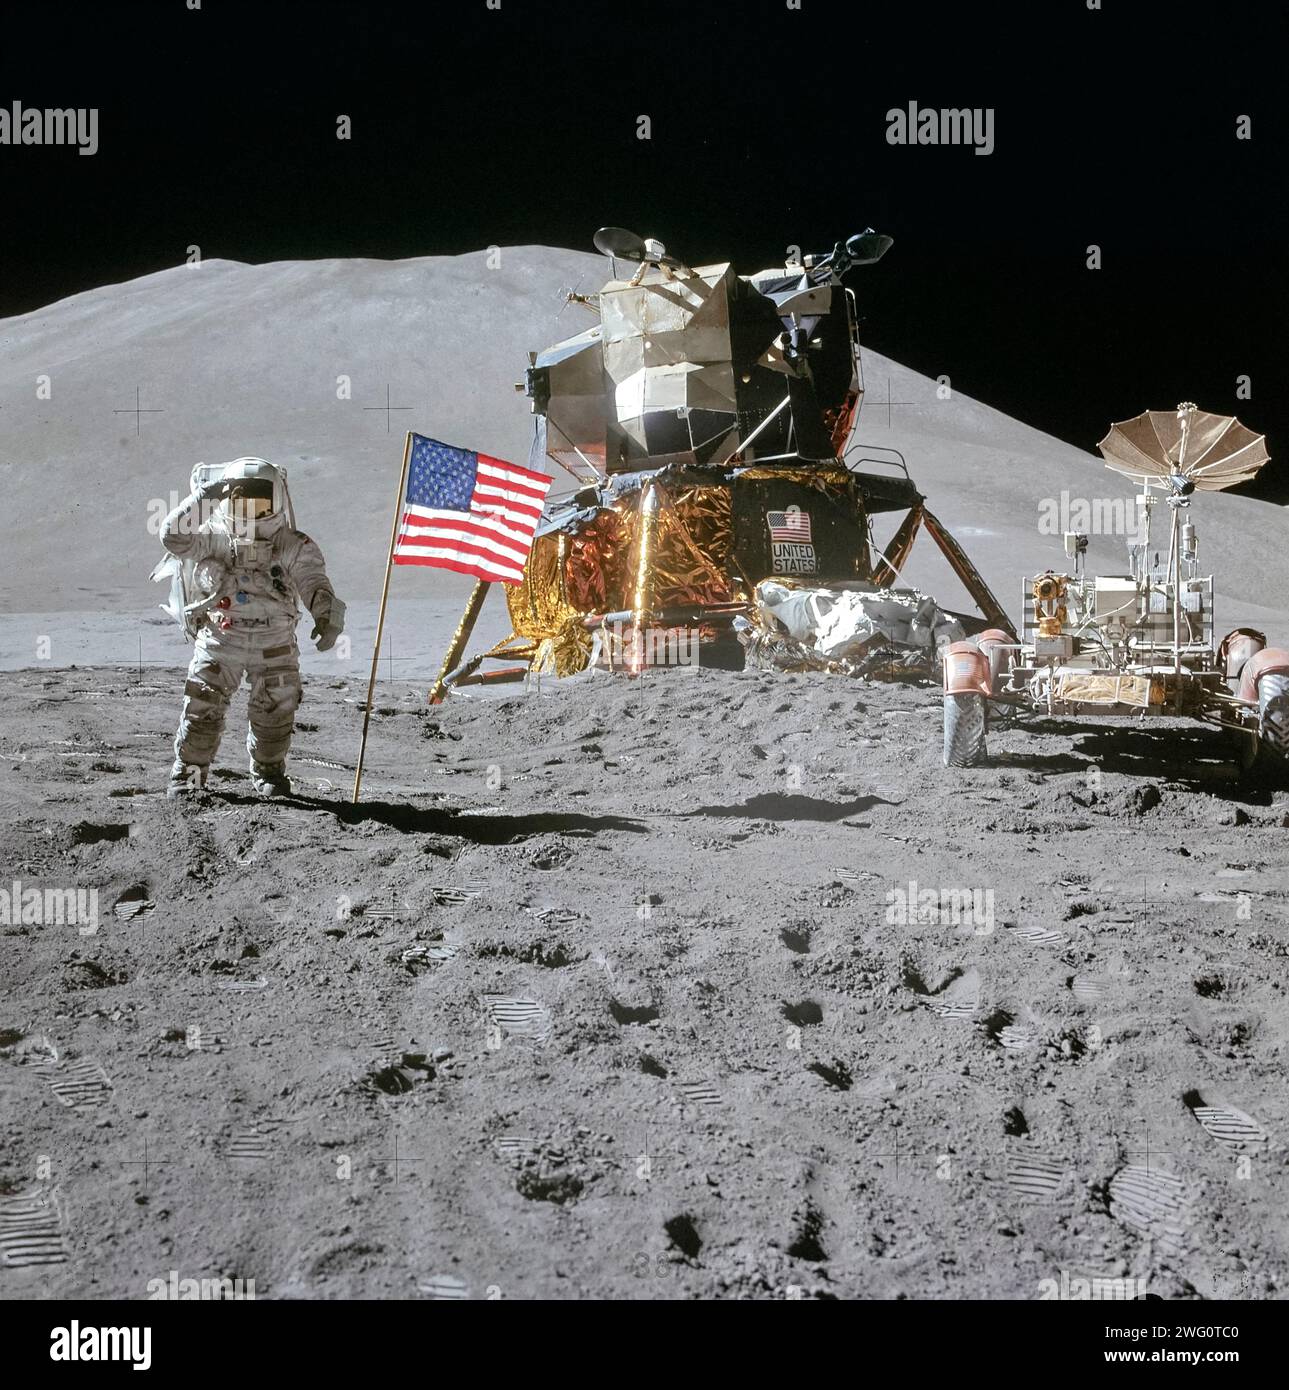 Apollo 15 Astronaut James Irwin salutes beside the American flag next to the Falcon lunar module and Lunar Roving Vehicle at the Hadley-Apennine landing site on 1 August 1971. Stock Photo